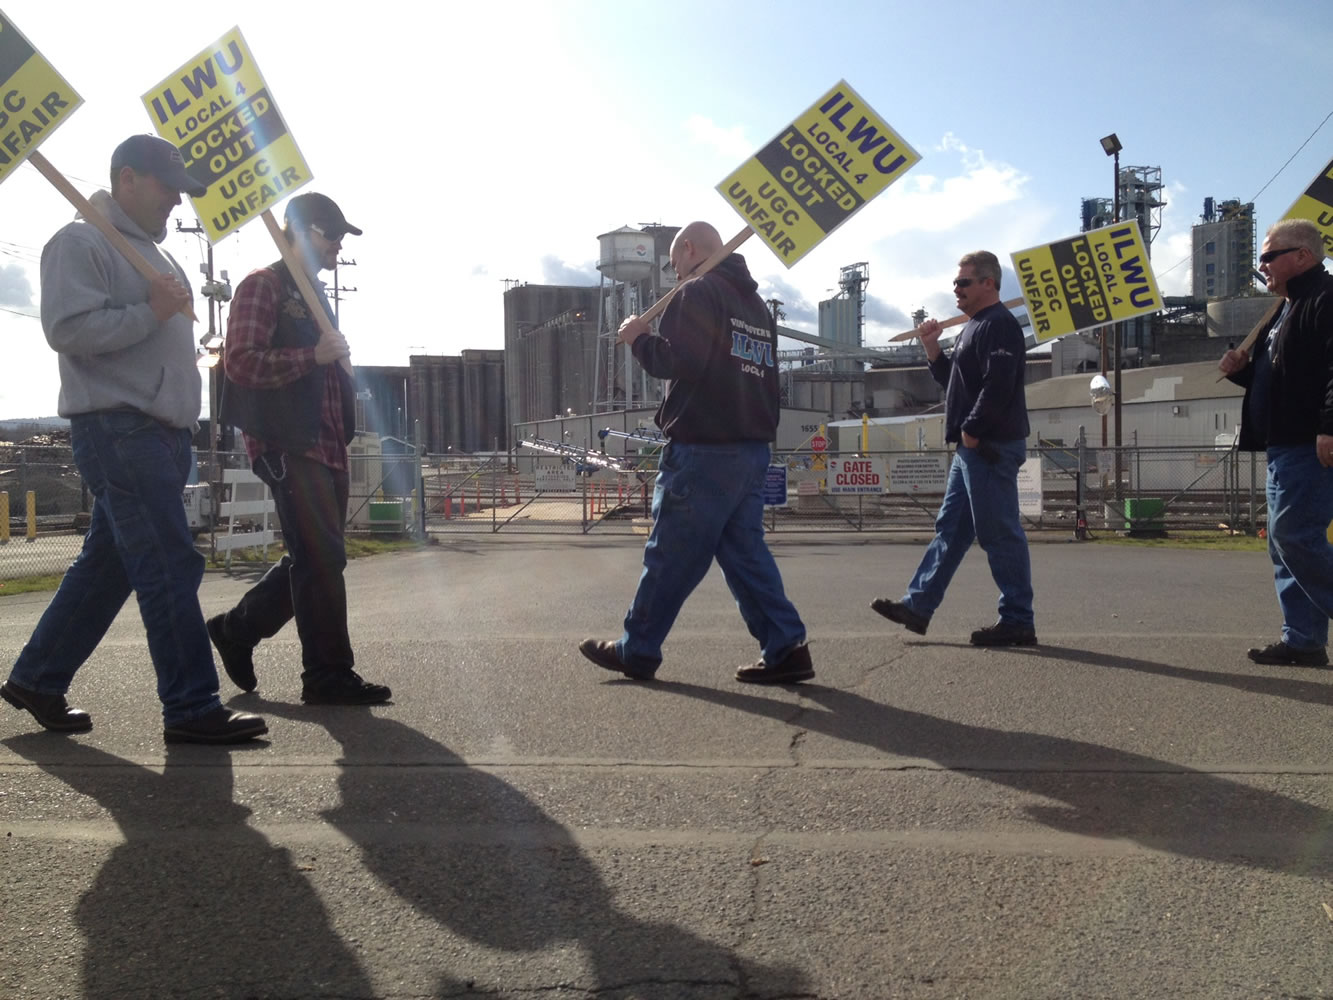 United Grain dockworkers picket Sunday afternoon, the sixth day of United Grain's lockout of 44 workers in their dispute over working rules outlined in an offered contract.